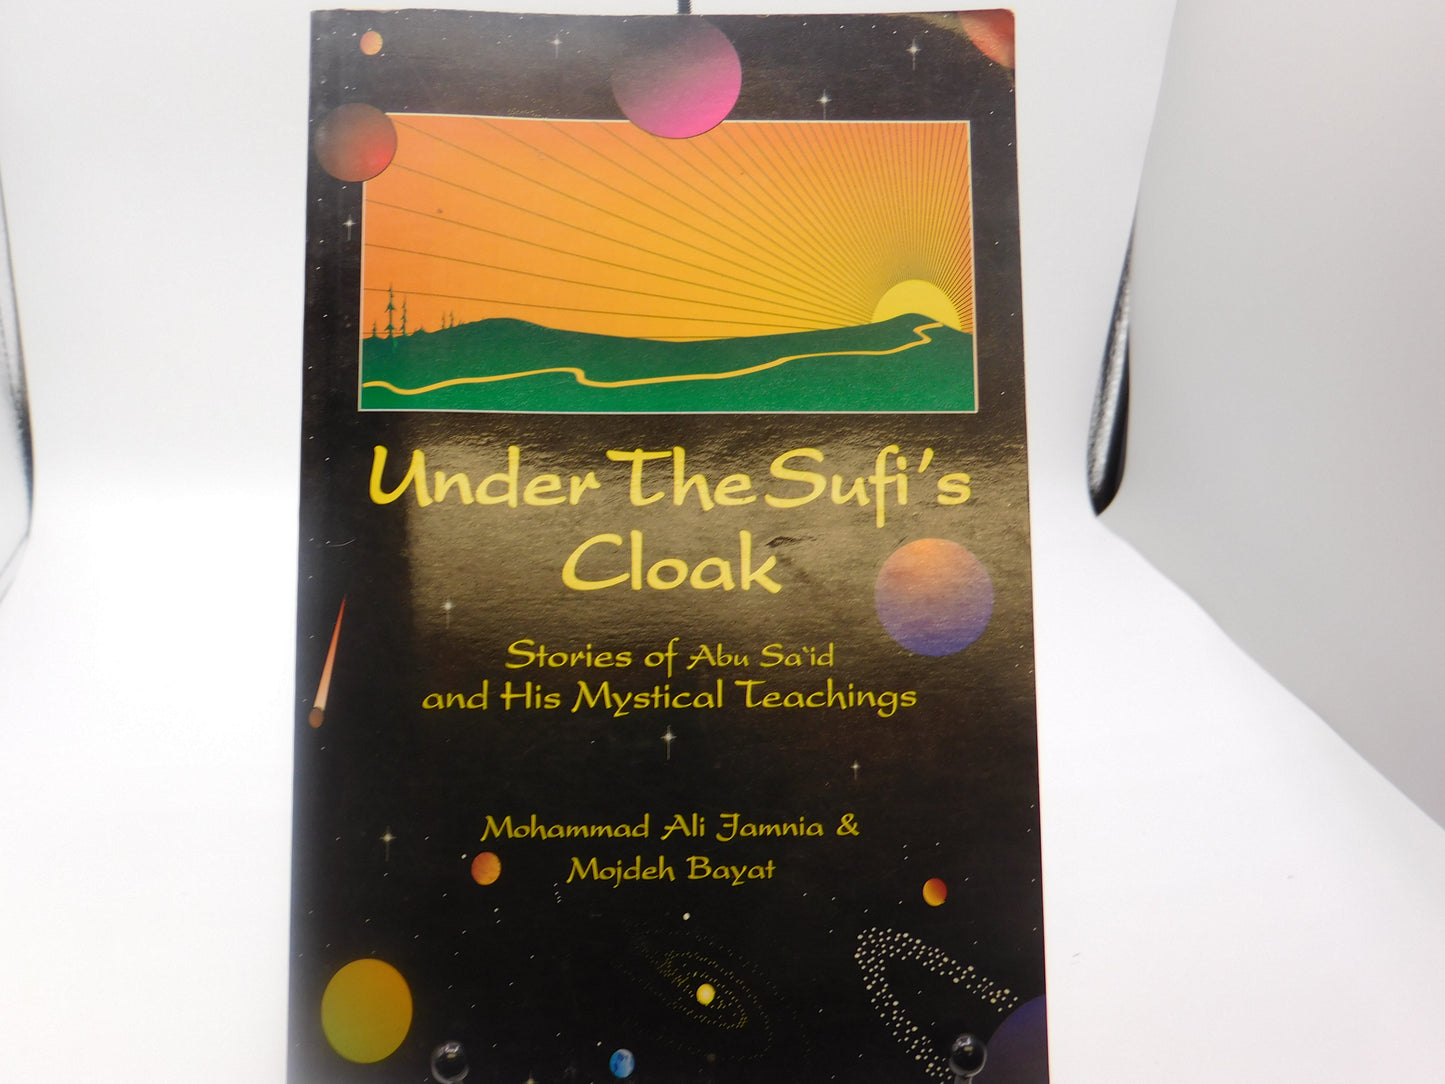 Under the Sufi's Cloak: Stories of Abu Said and His Mystical Teaching by Mohammad Ali Jamina and Mojdeh Bayat